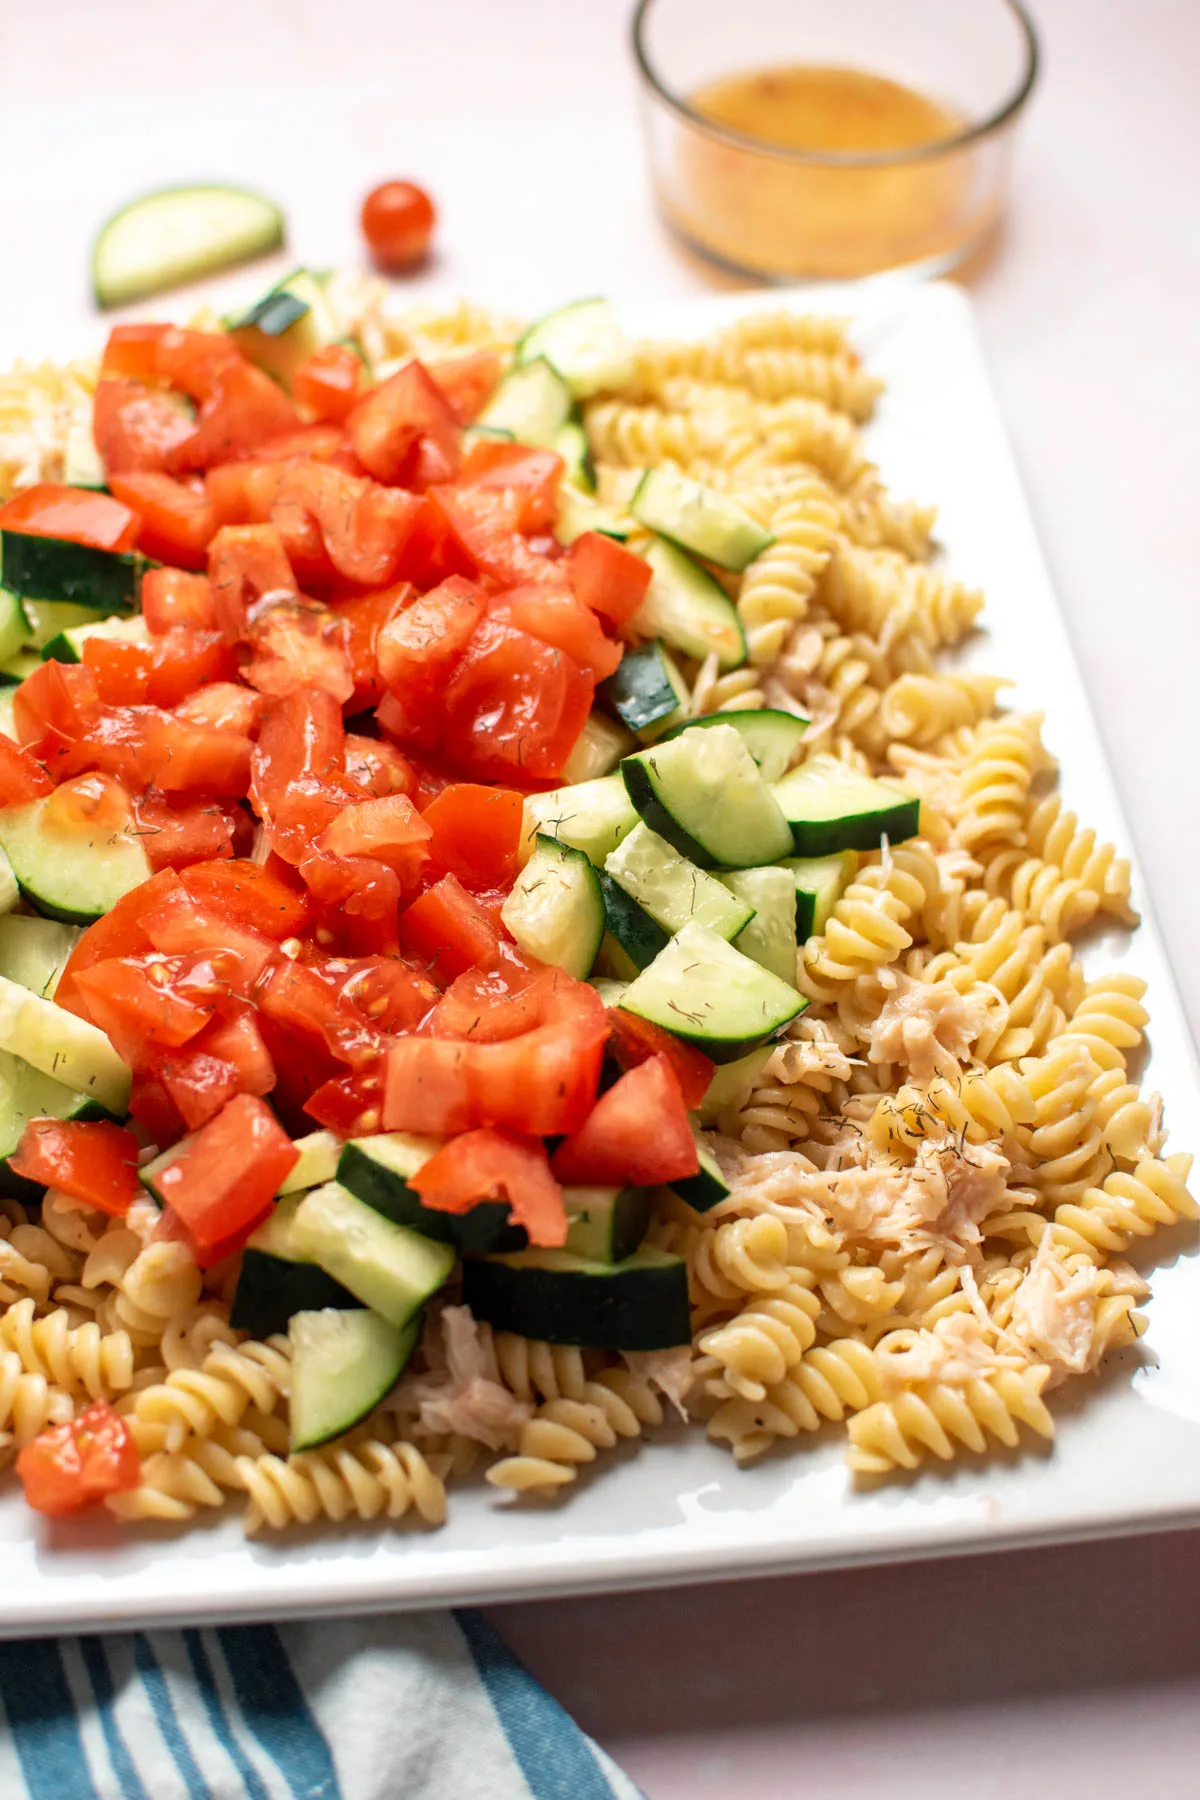 Chicken pasta salad with rotini, tomatoes, and cucumbers, on large square platter.